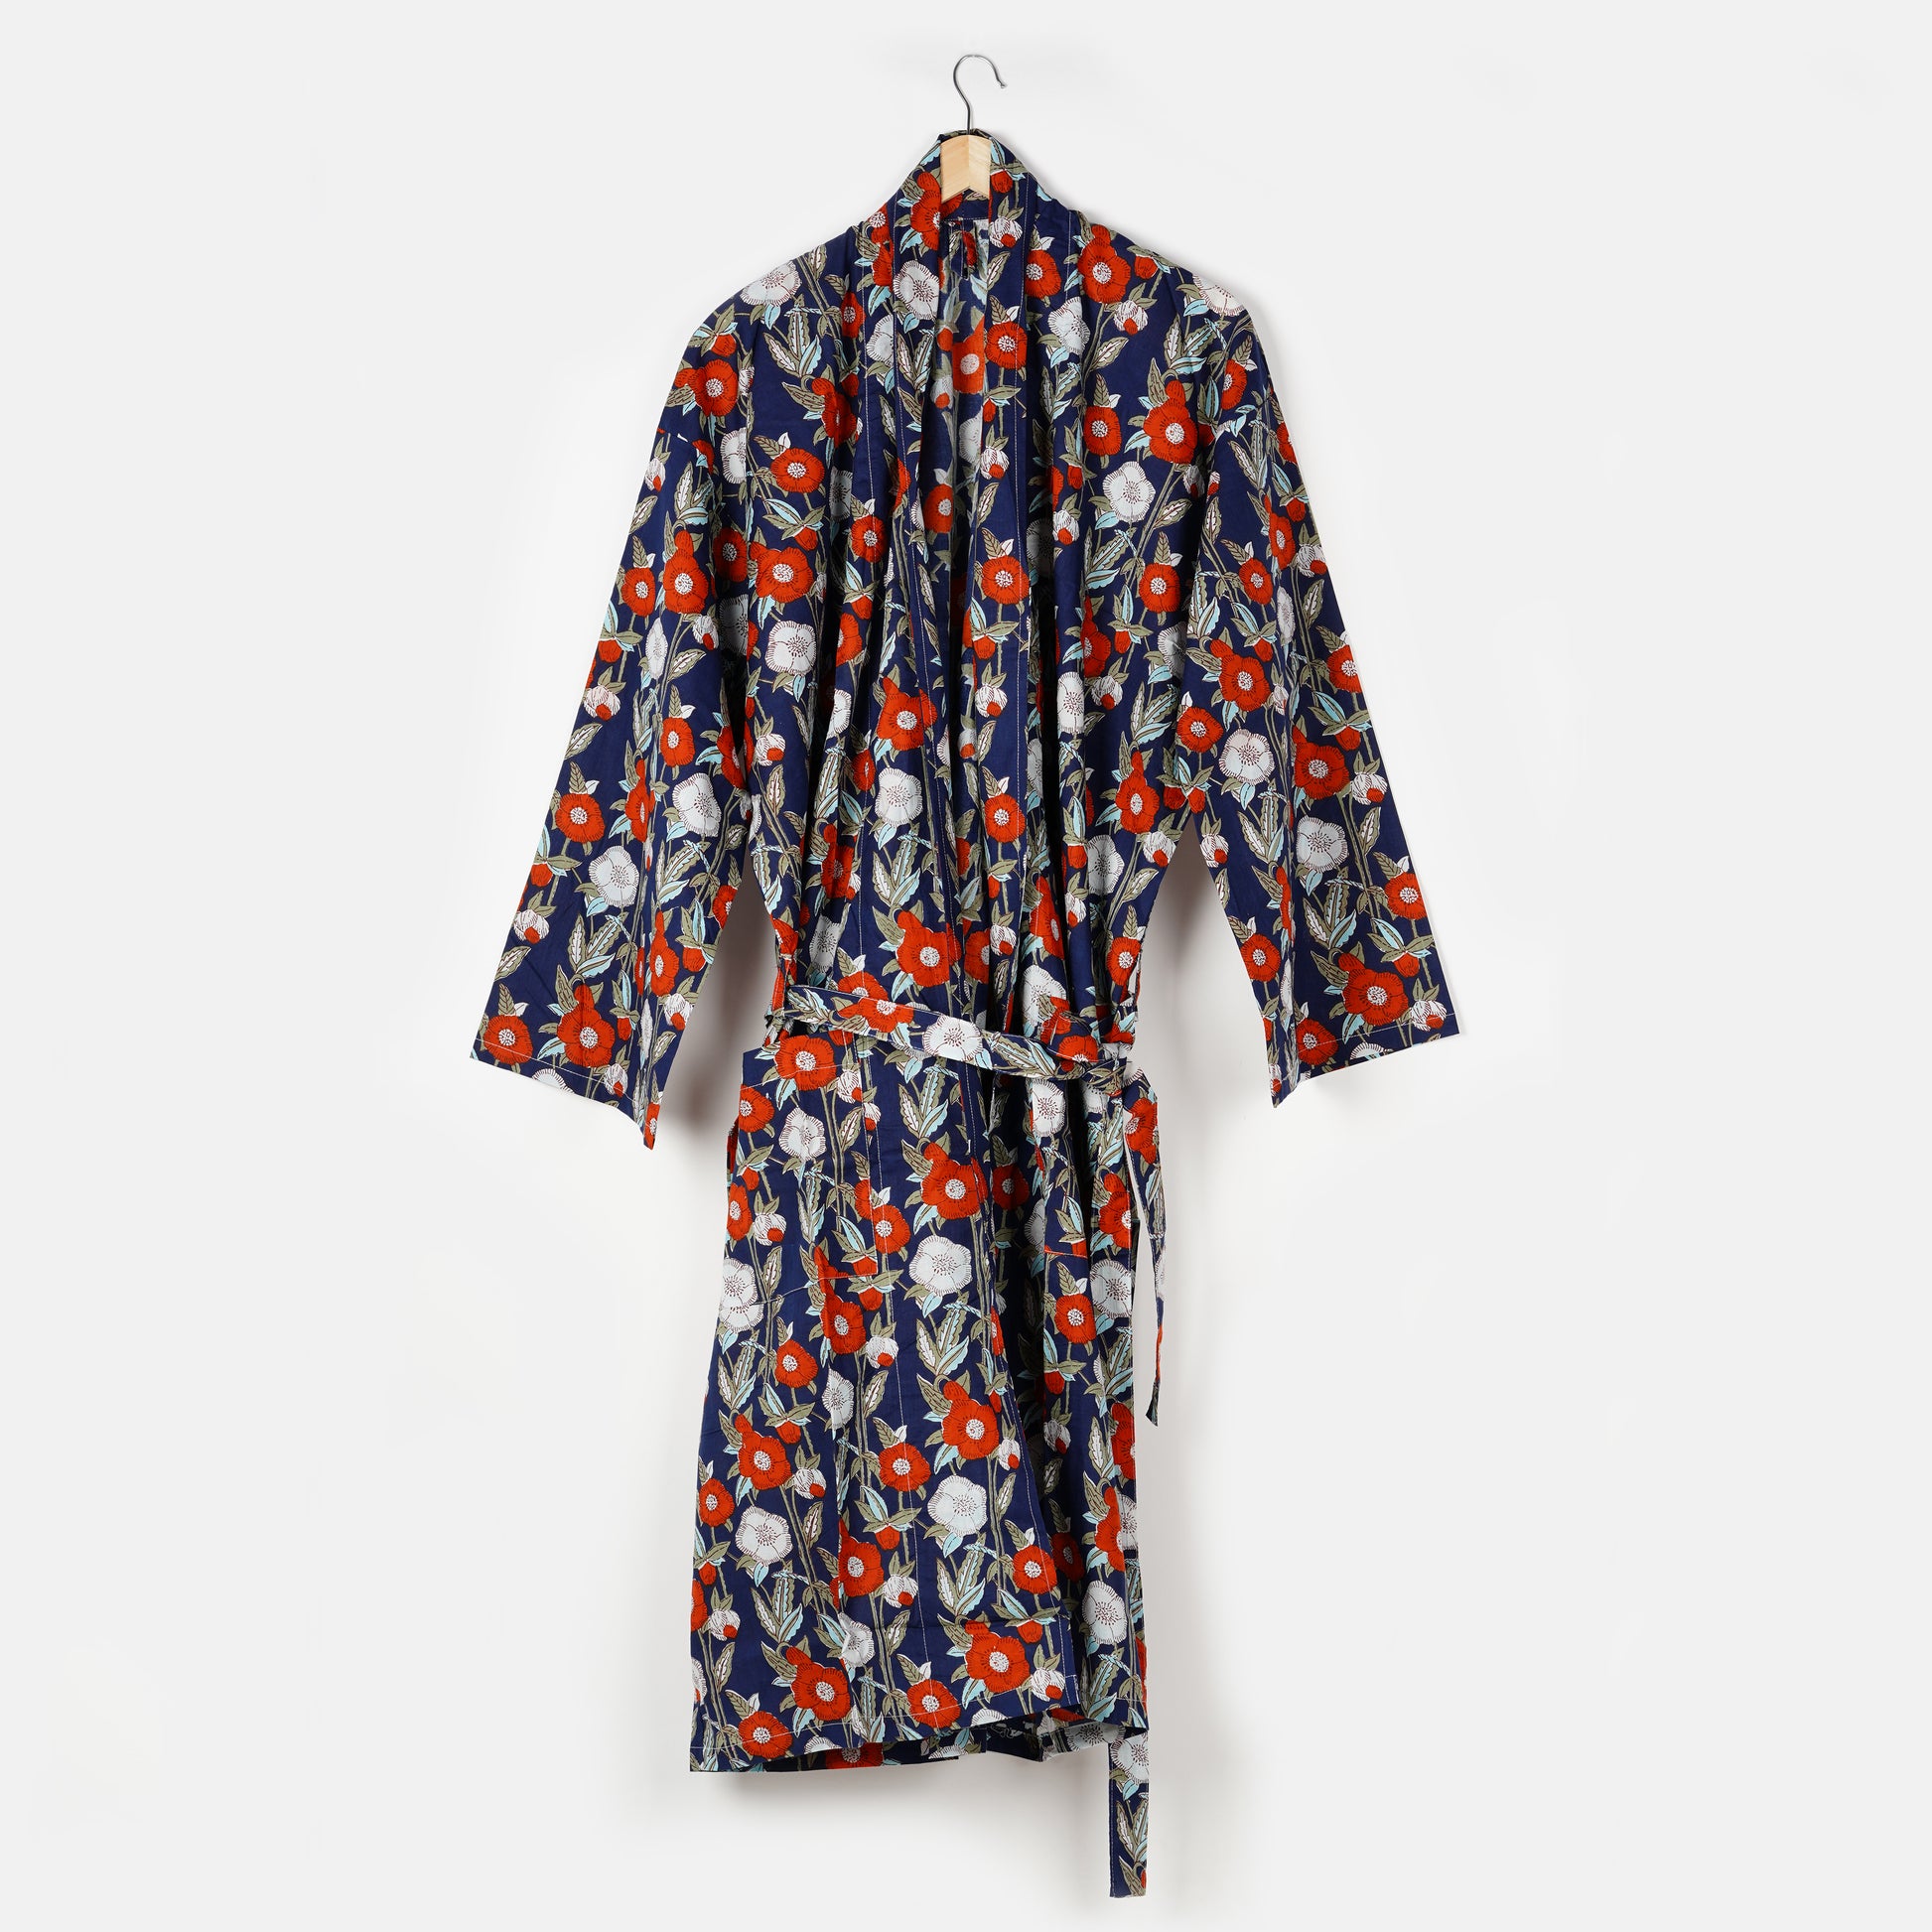 Kimono Bath Robes/ Night Suit -DS17 - The Teal Thread